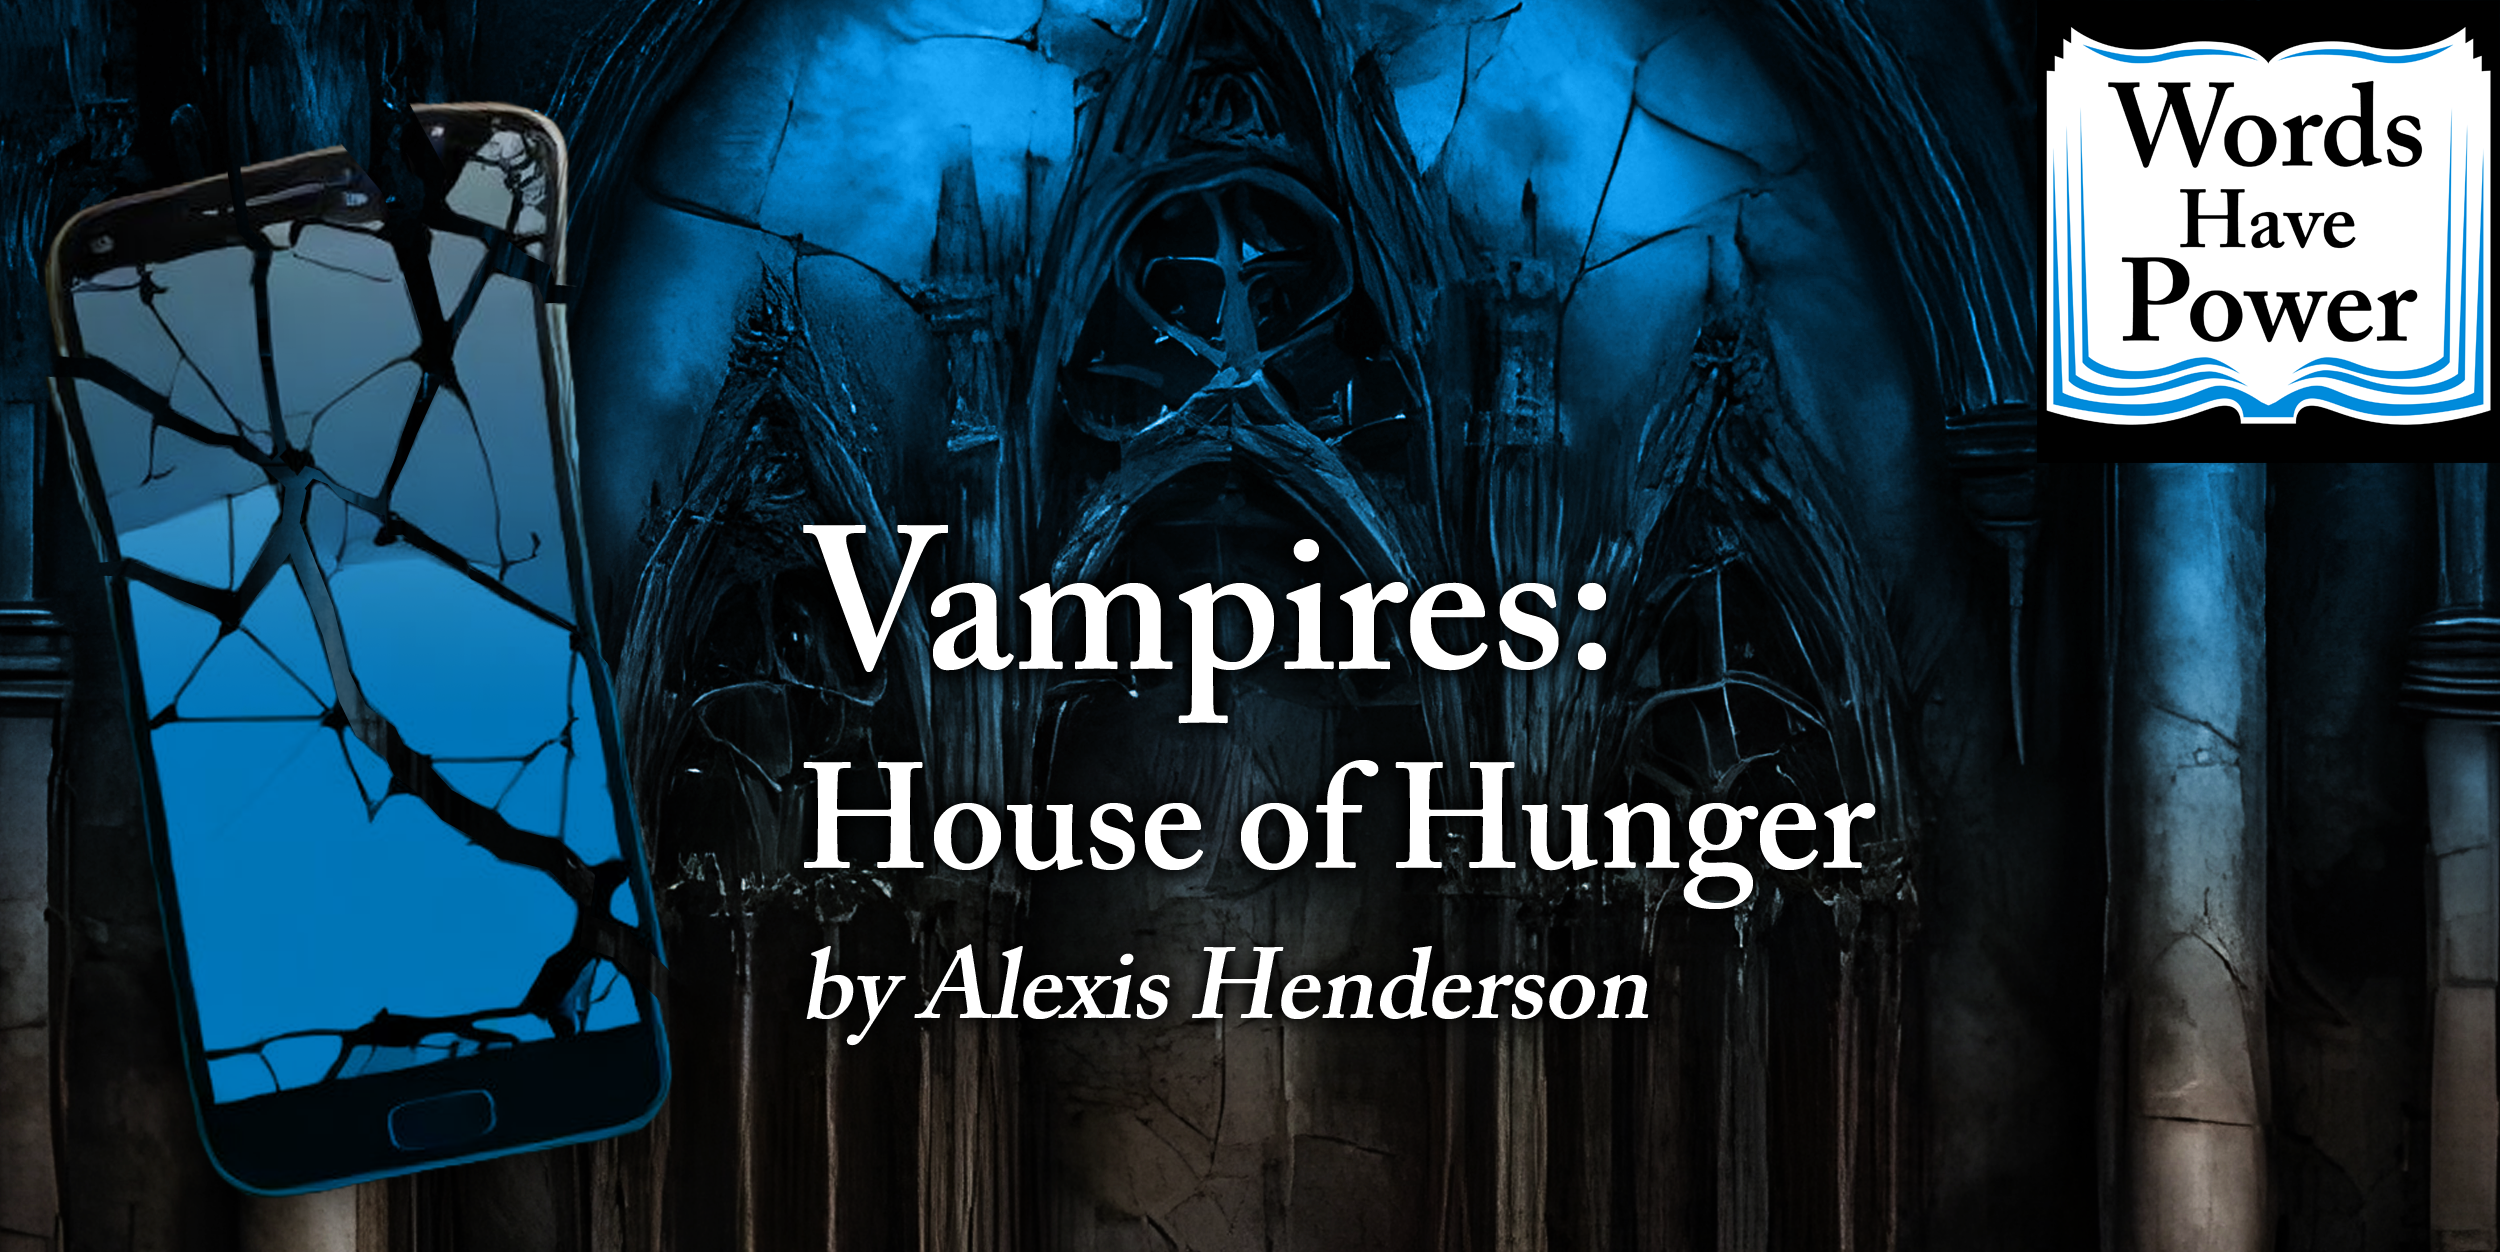 Vampires: House of Hunger by Alexis Henderson